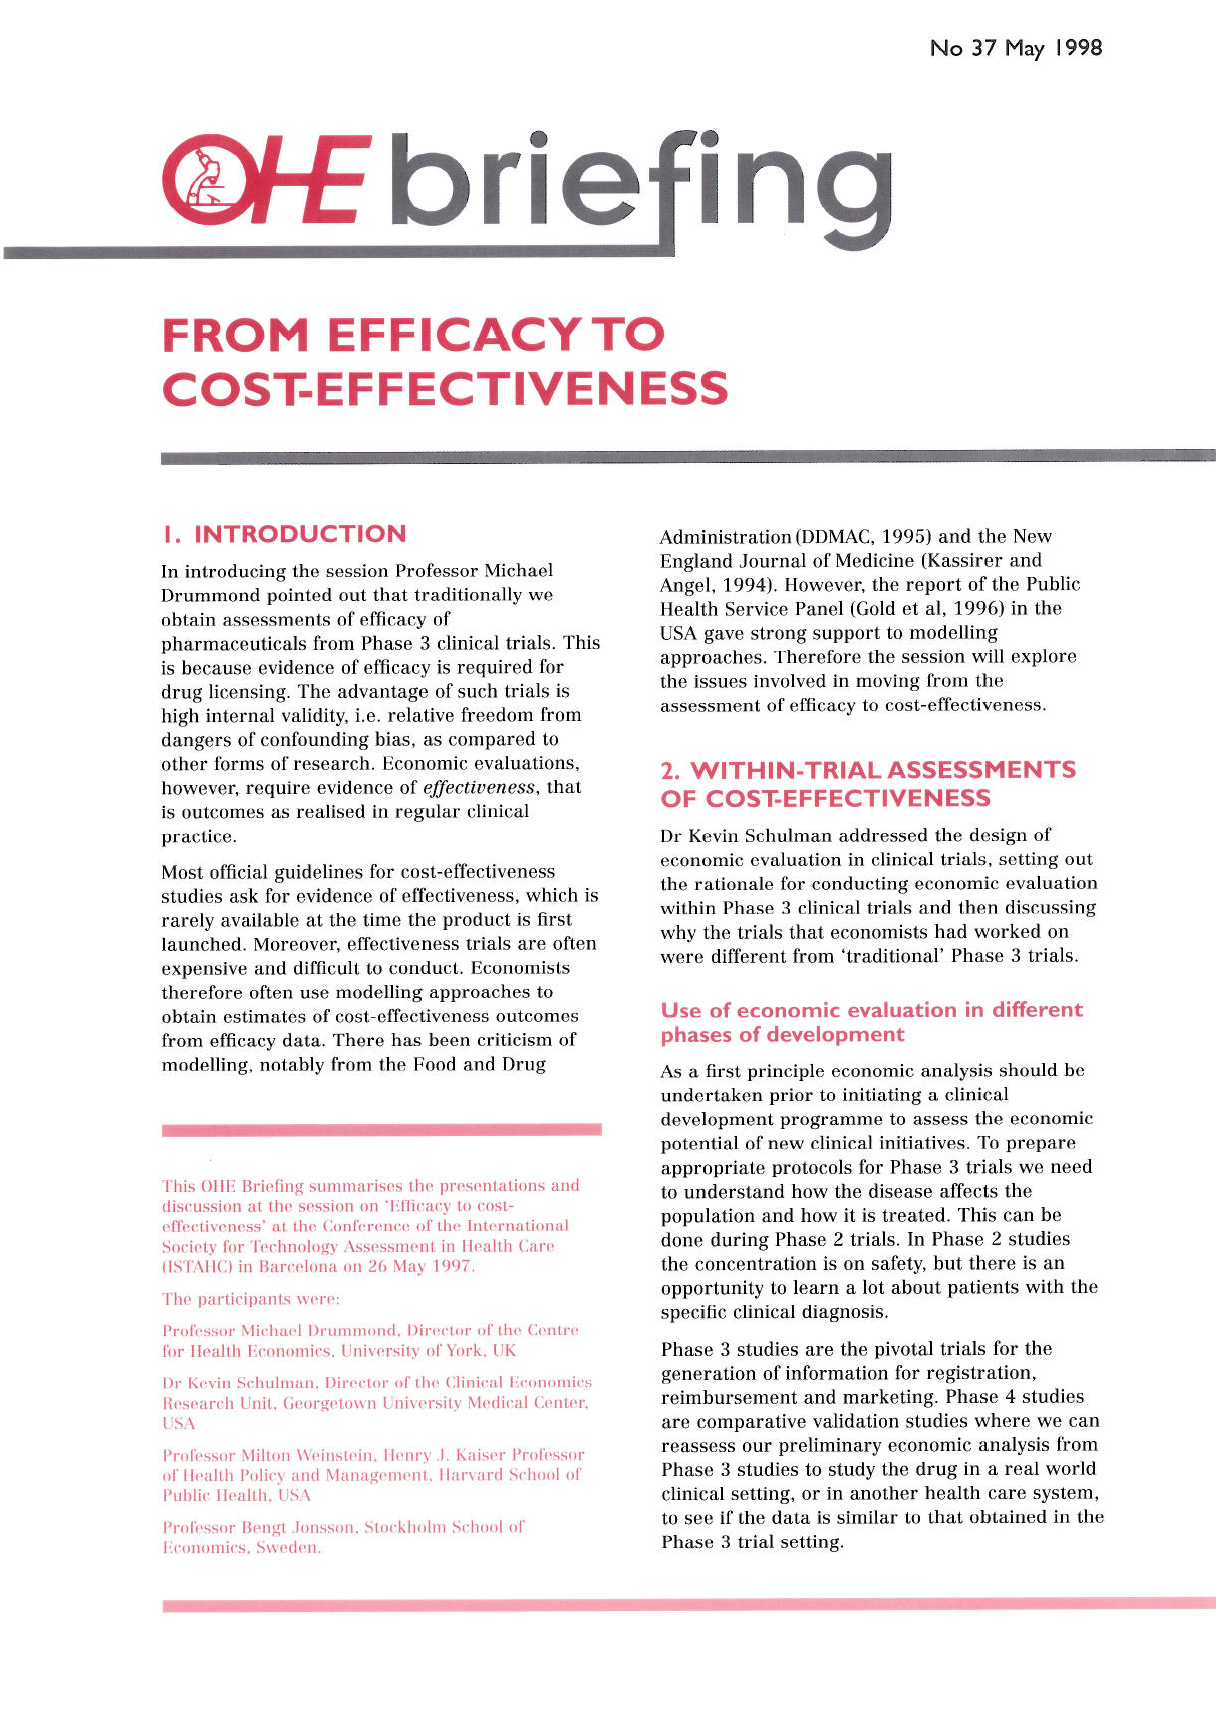 From Efficacy to Cost-Effectiveness